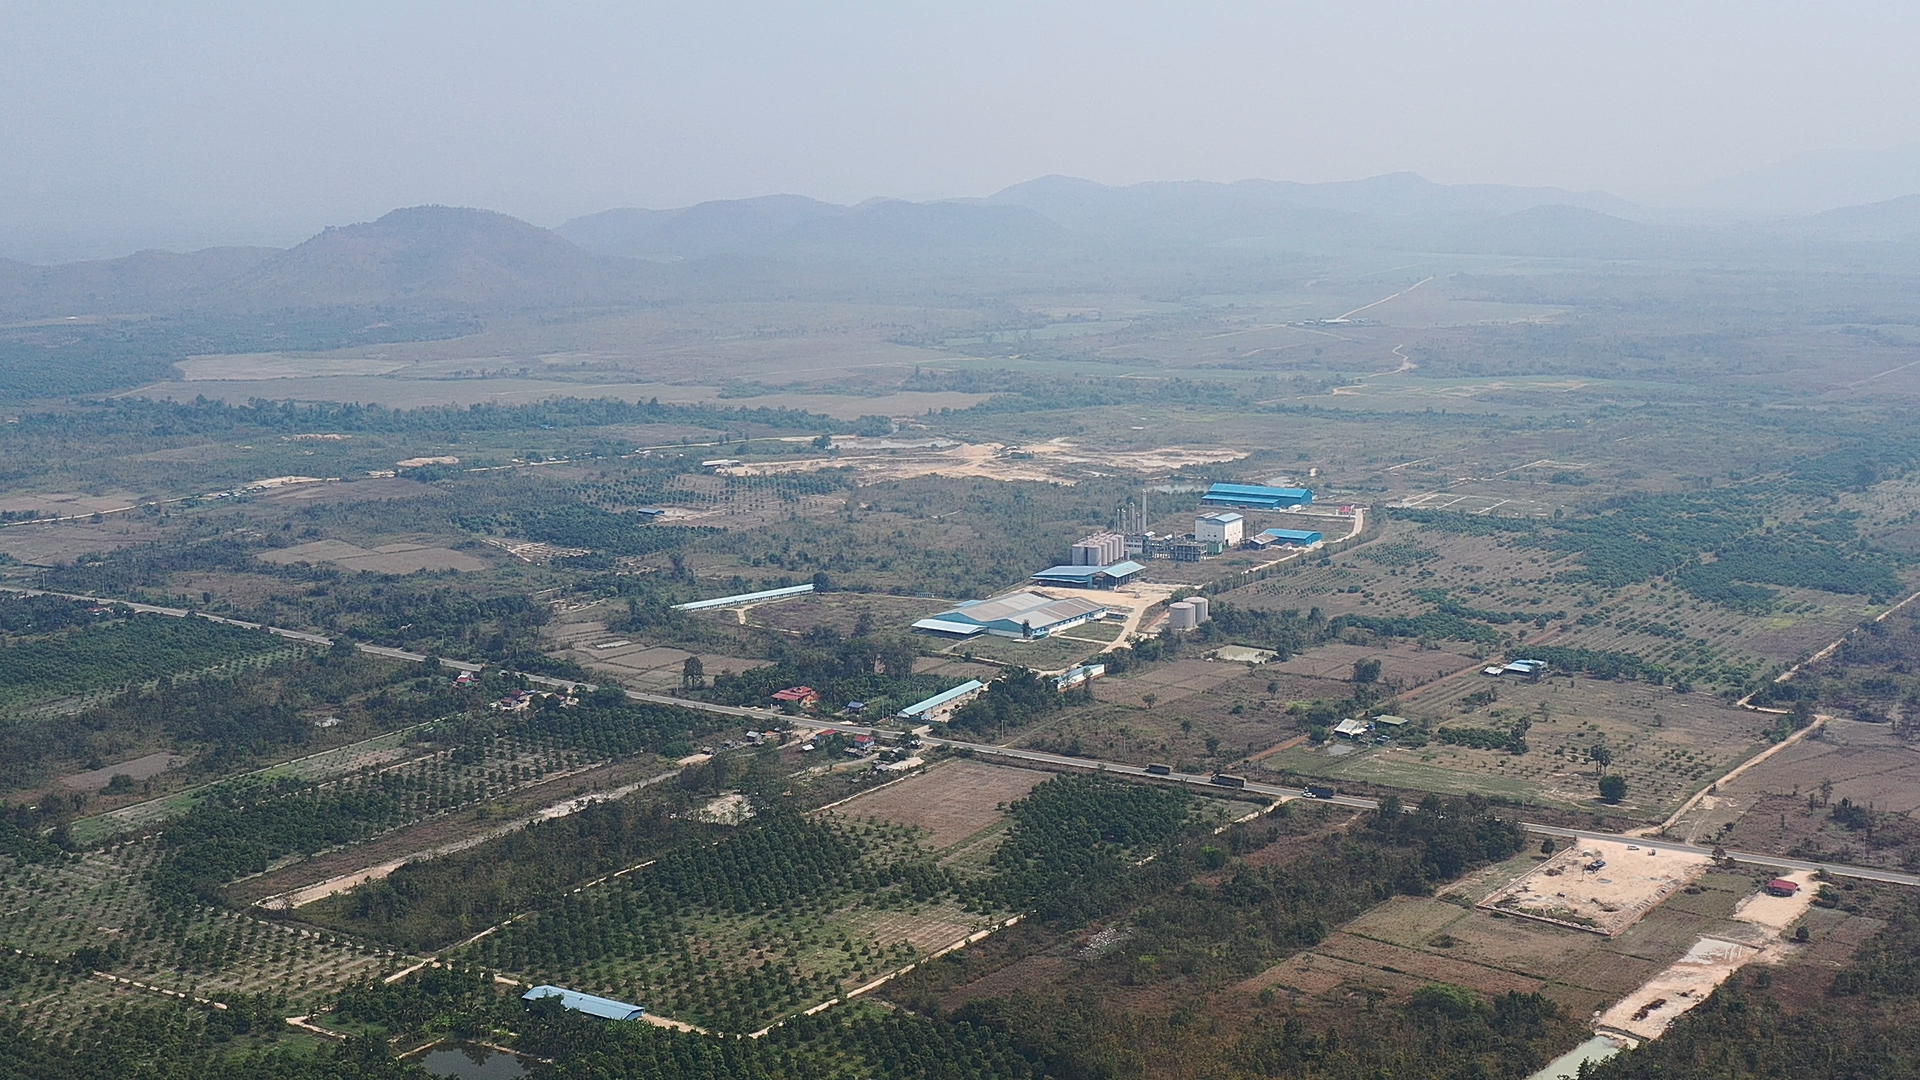 An agroindustrial compound in Kampong Speu province’s Oral district where a ketamine lab was found, photographed in February 2022. (Heng Vichet/VOD)